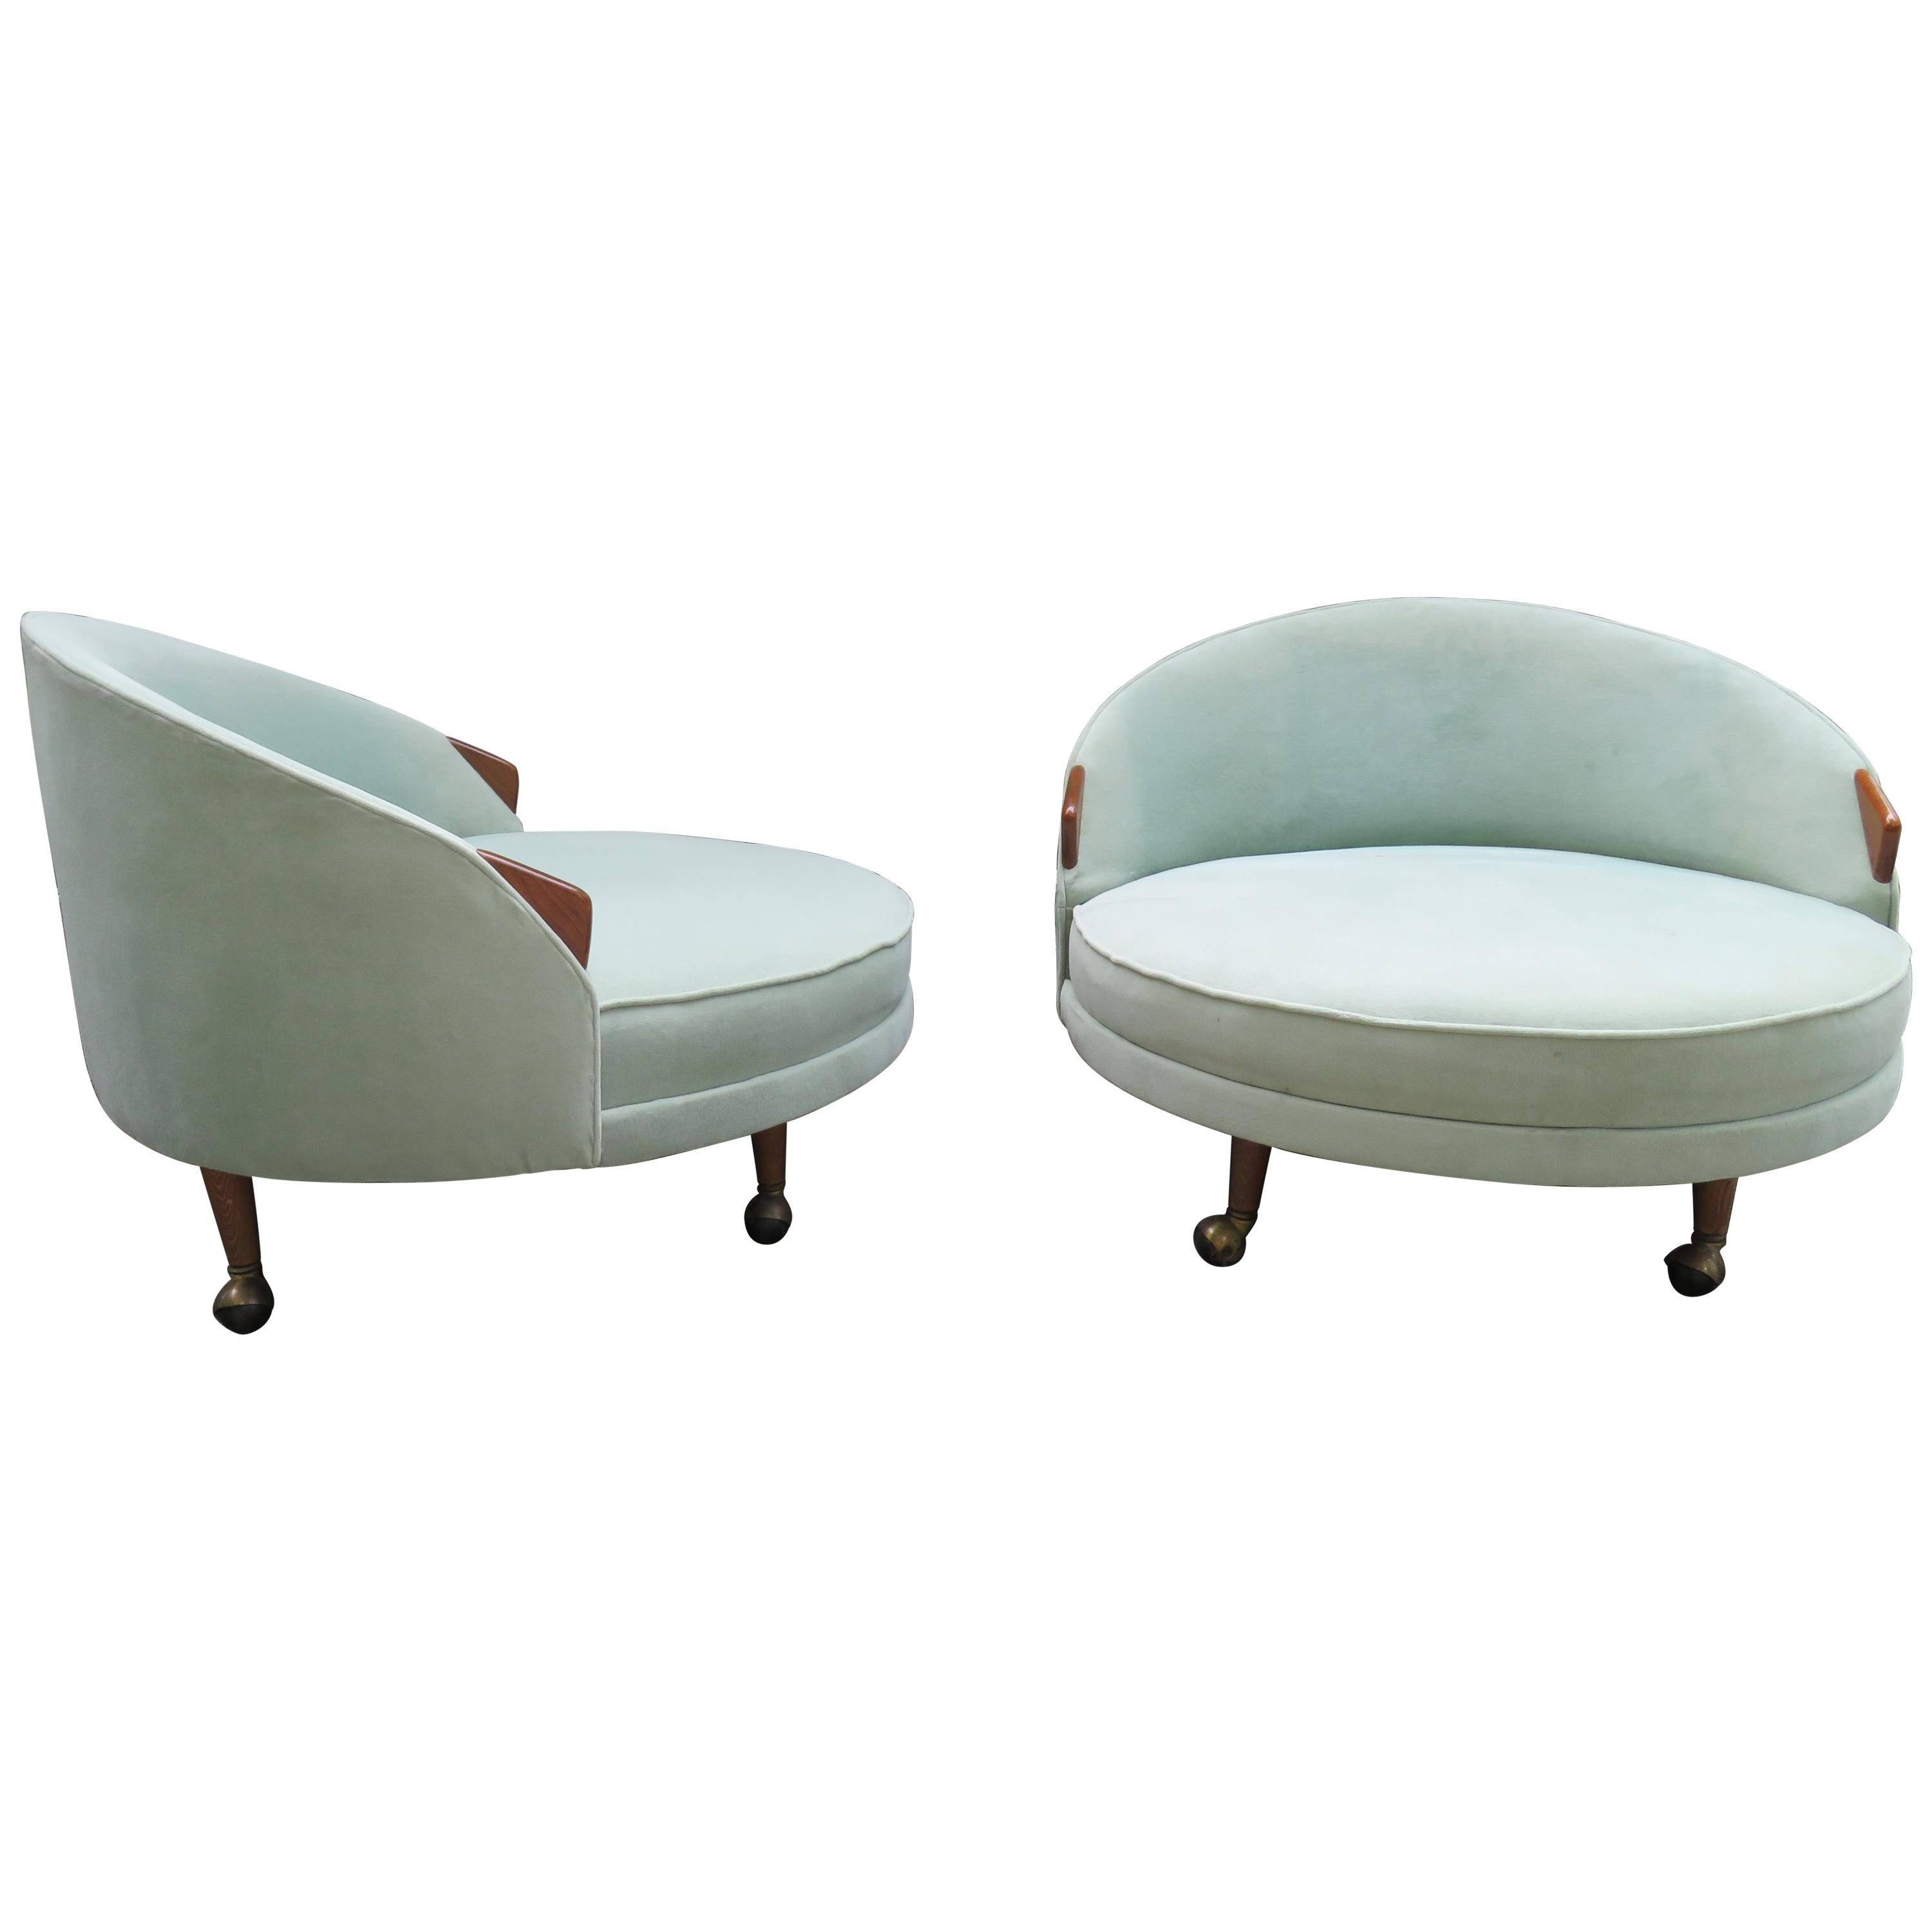 Lovely Pair of Adrian Pearsall Havana Circle Lounge Chairs Mid-Century  Modern at 1stDibs | adrian pearsall havana chair